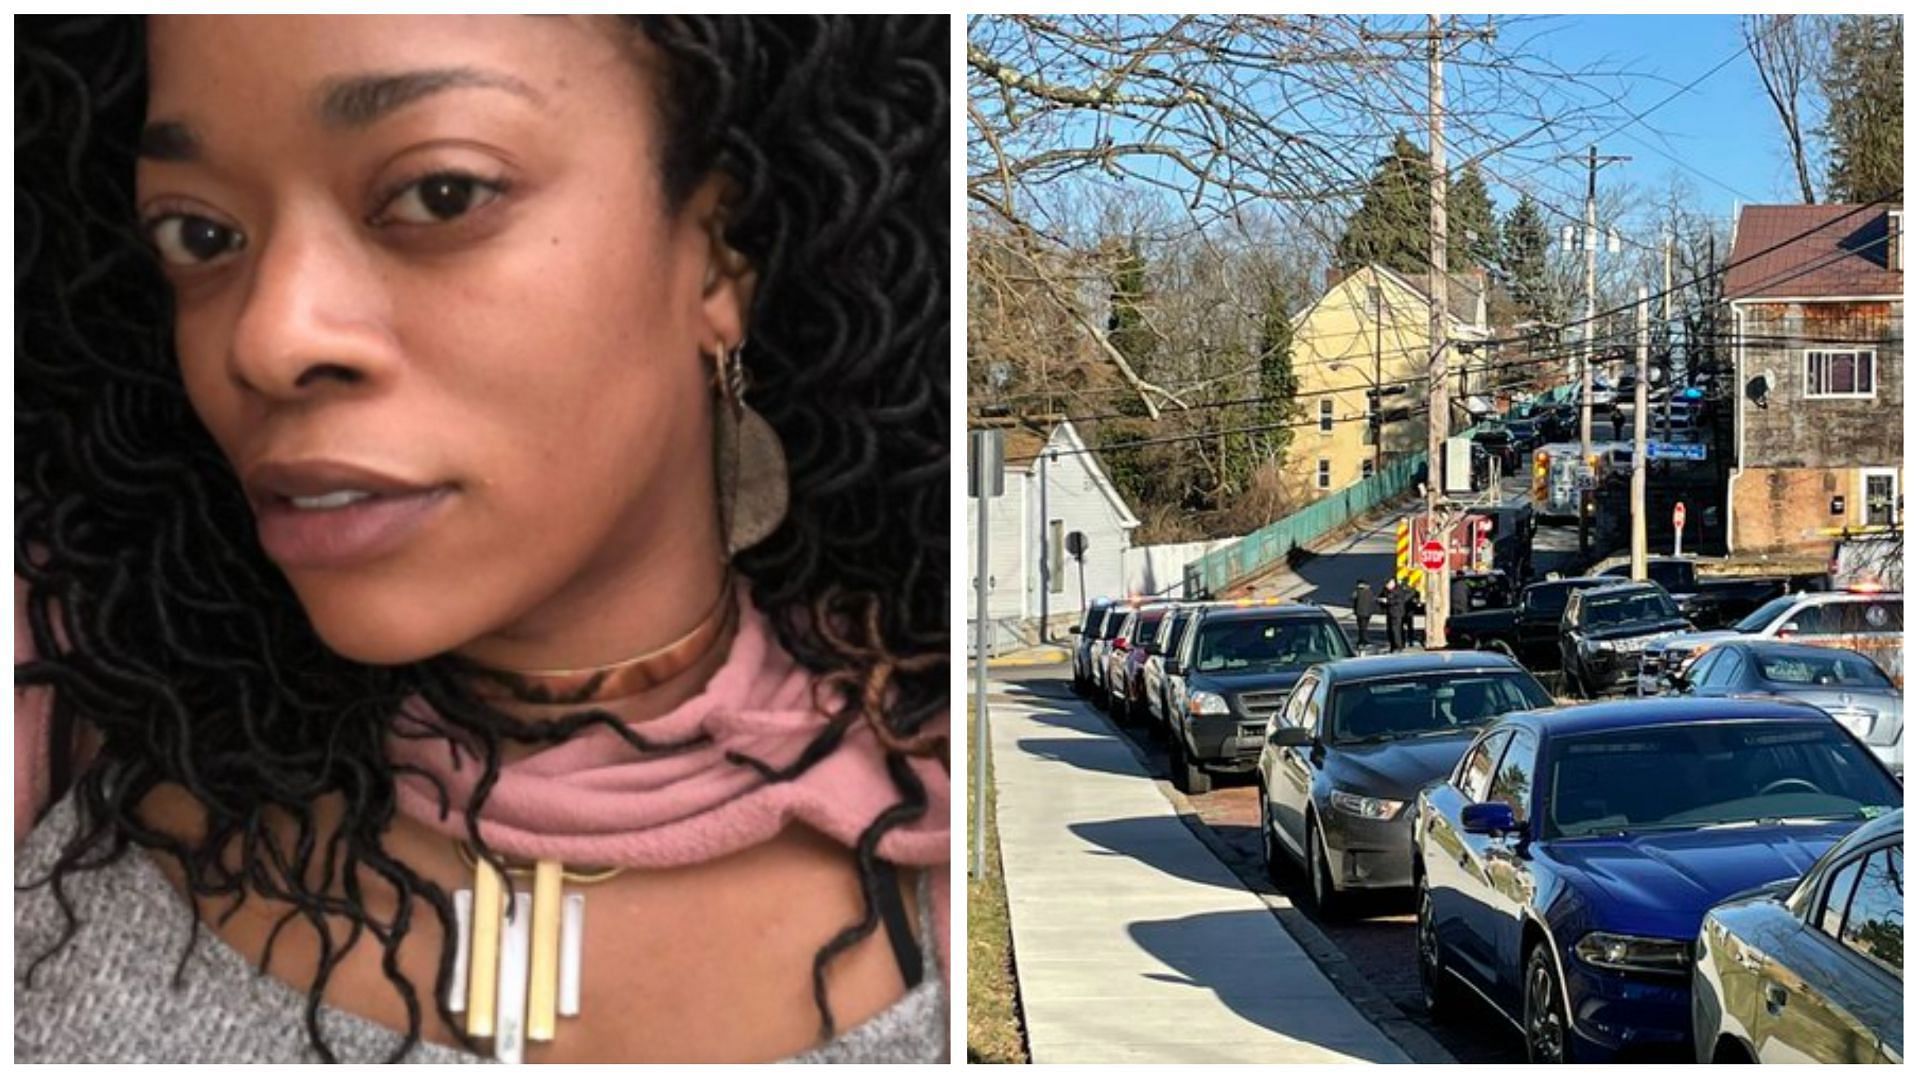 Adrienne Arrington was killed in an alleged police shooting in a Pittsburgh neighborhood at an abandoned house, (Images via IncarcerNation and Rich Pierce/Twitter)